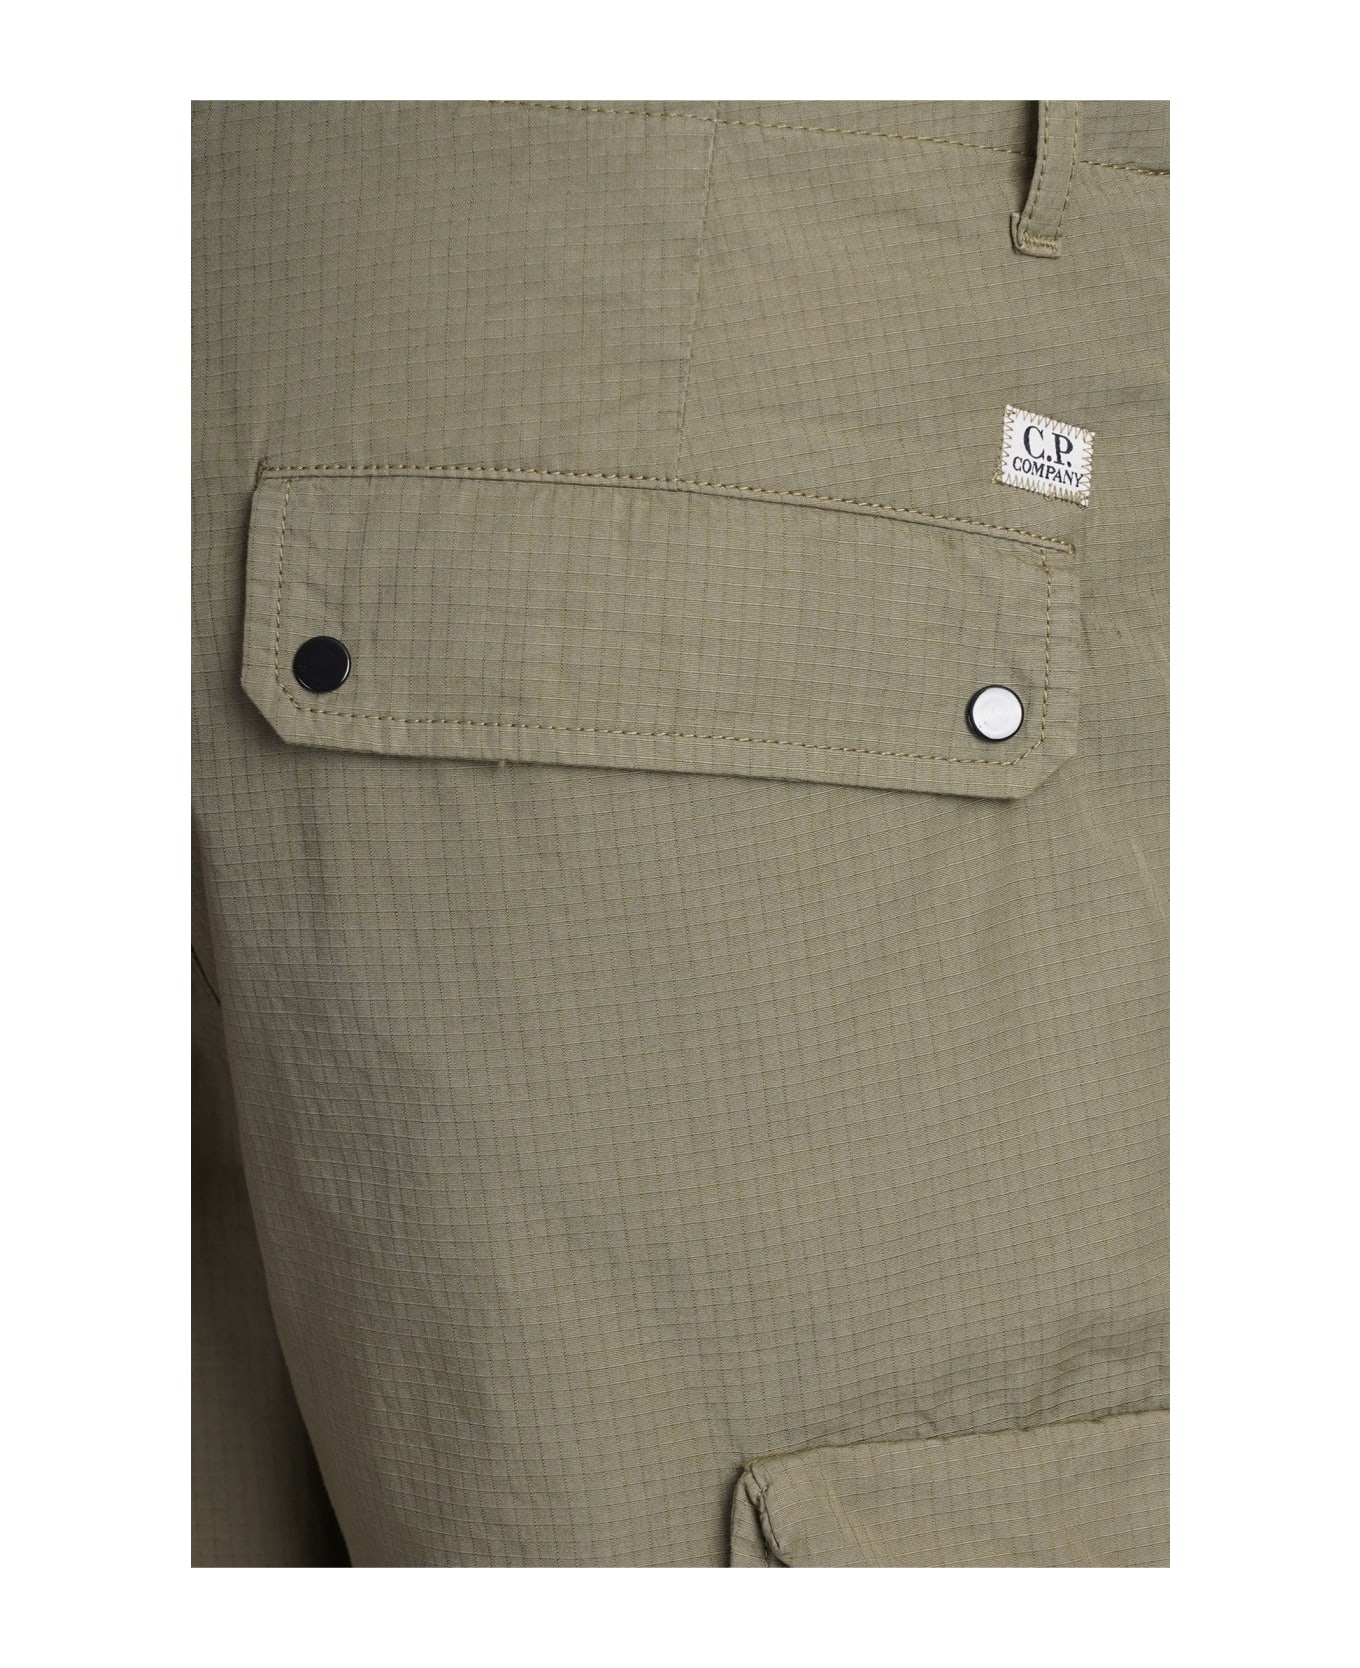 C.P. Company Rip Stop Pants In Green Cotton - Agave Green